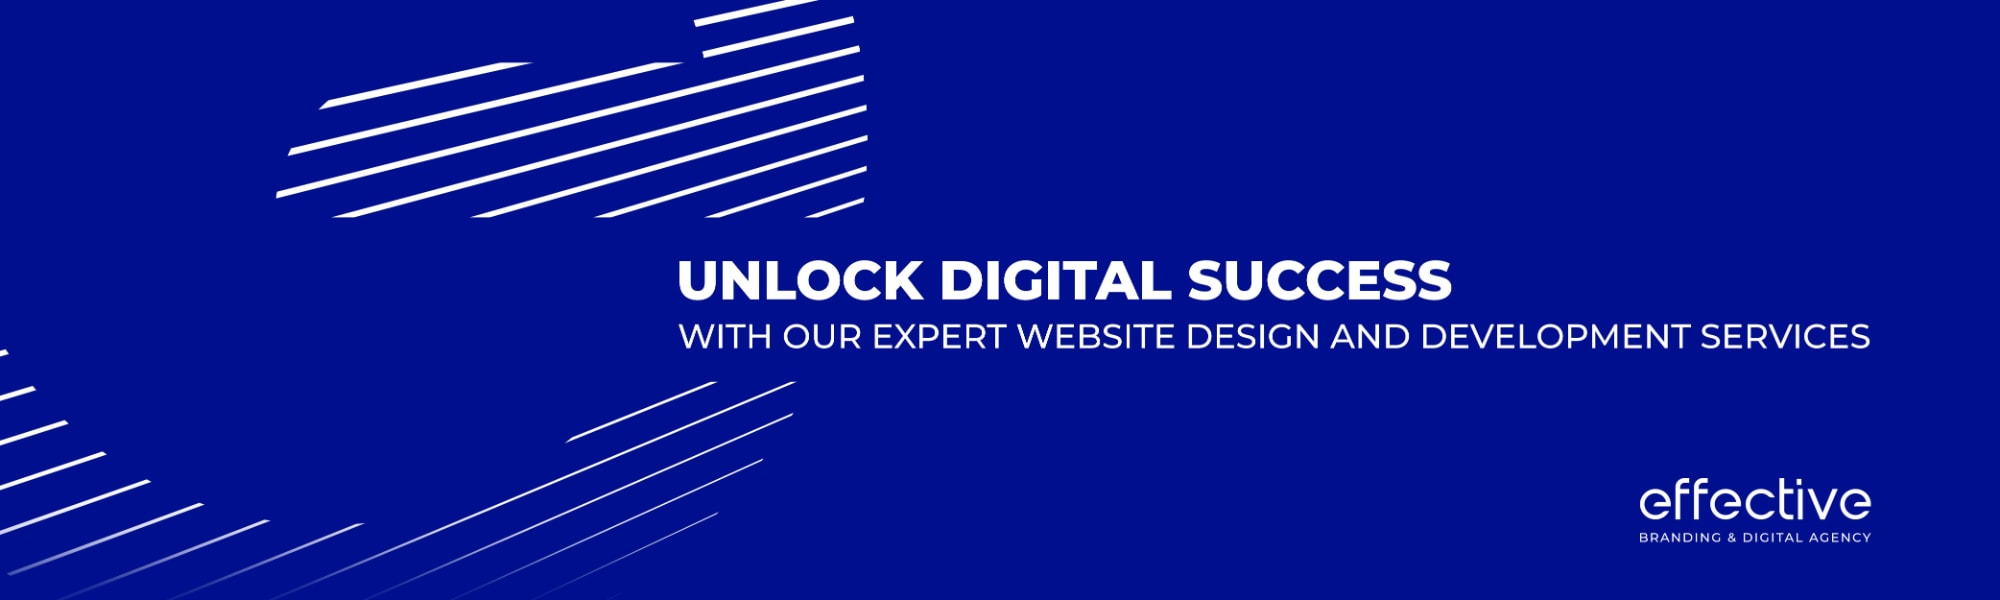 Unlock Digital Success with Our Expert Website Design and Development Services